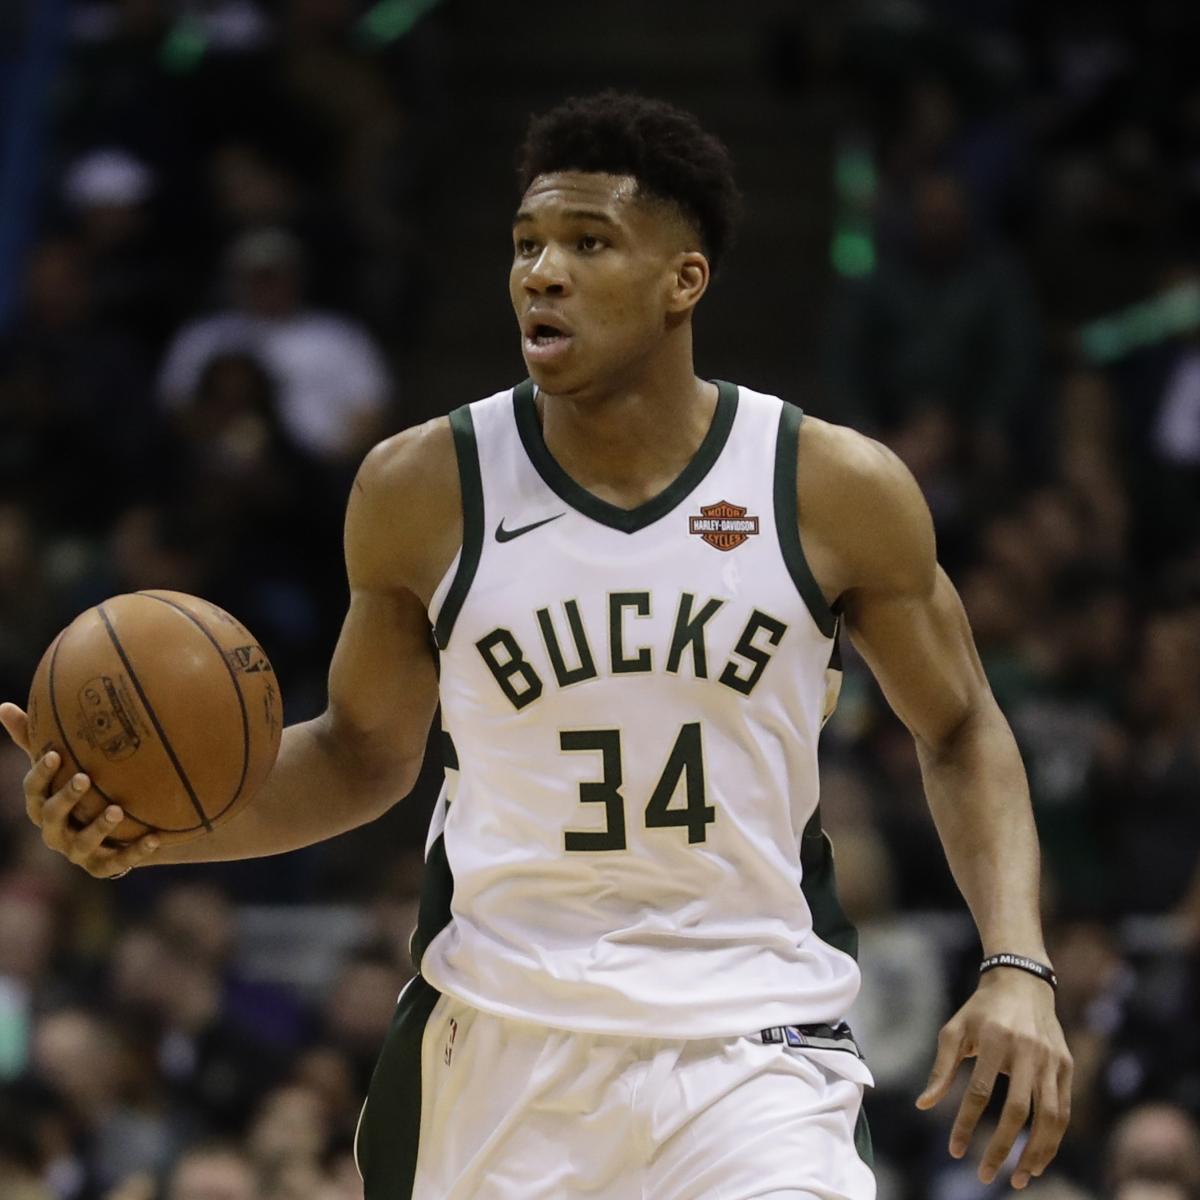 Giannis Antetokounmpo S 1st Nike Signature Shoe Appears To Leak On Social Media Bleacher Report Latest News Videos And Highlights